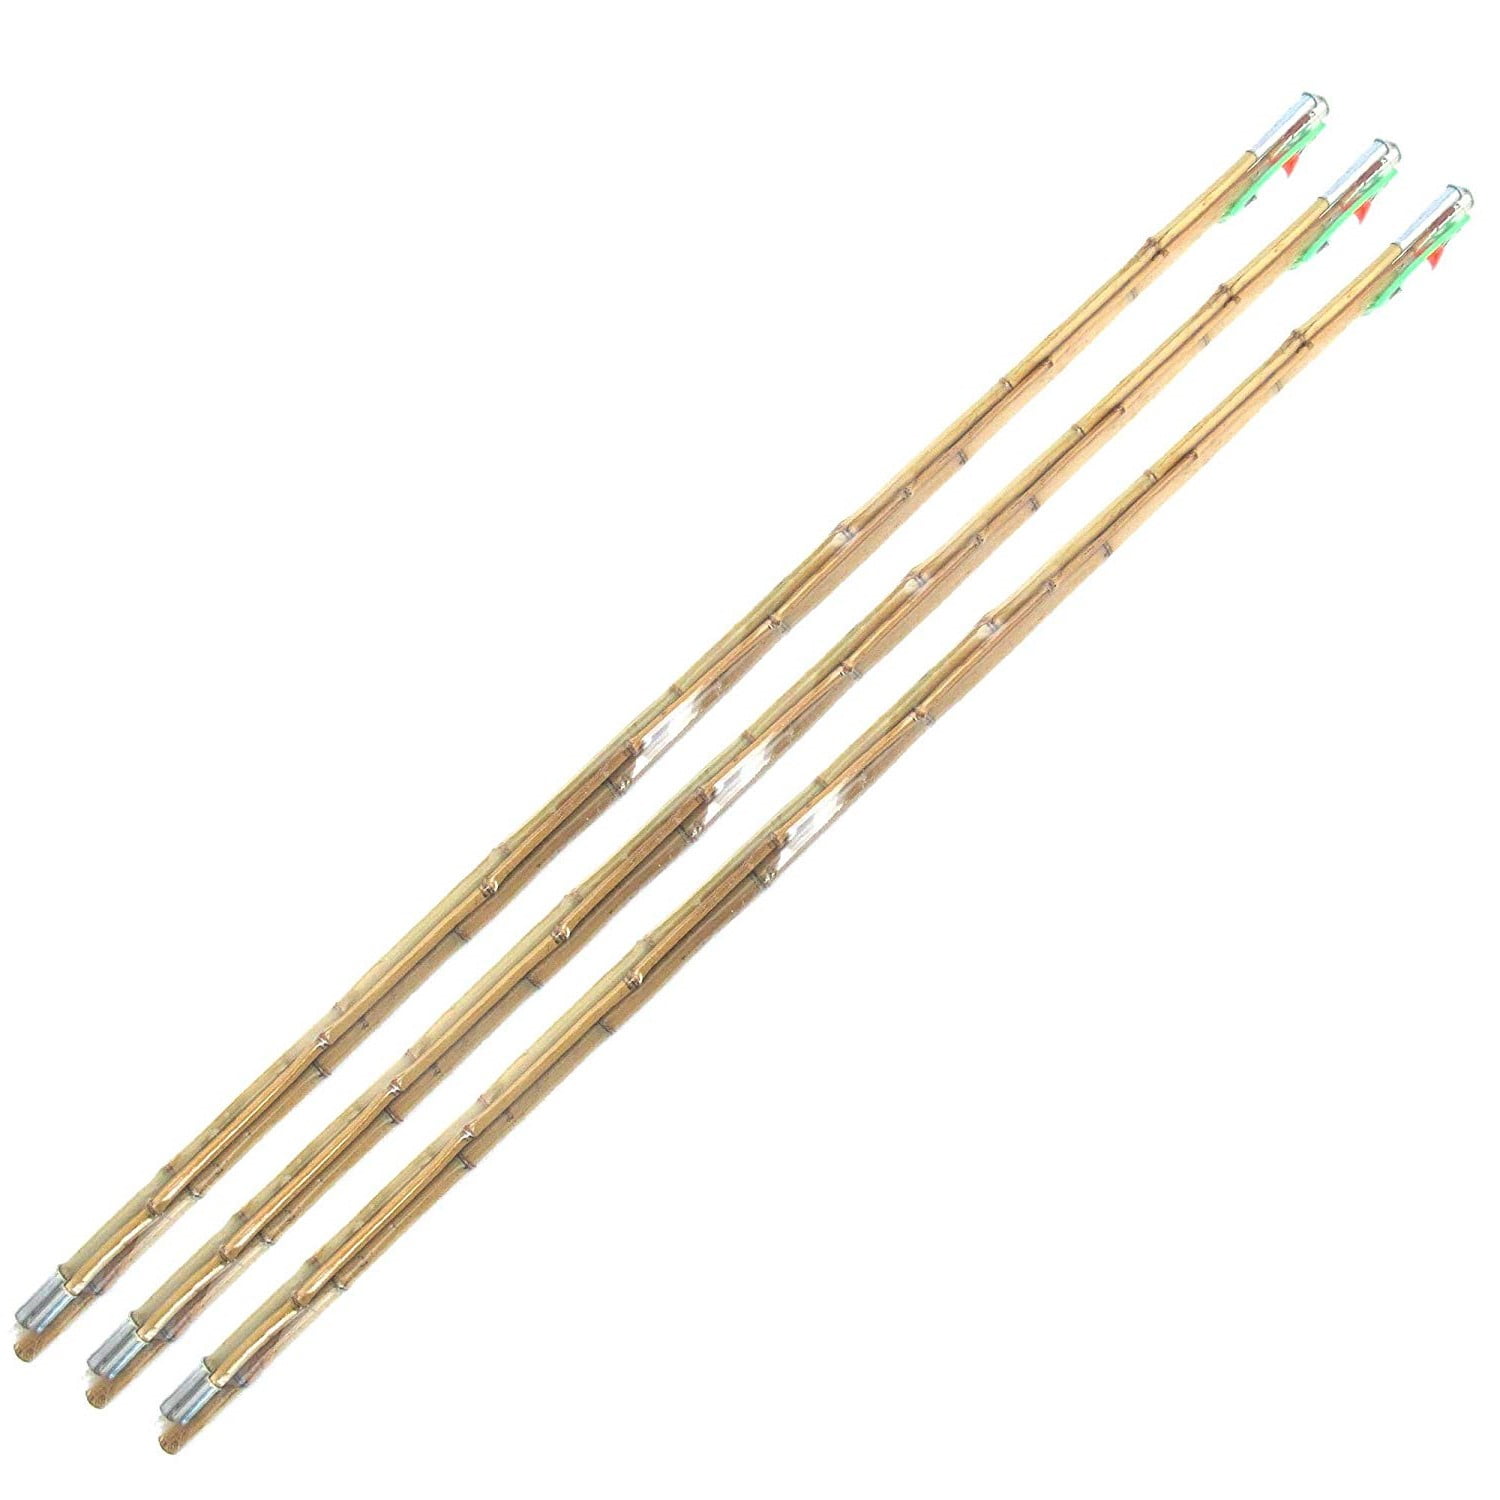 BambooMN 6.5 ft 2 Piece Natural Bamboo Vintage Cane Fishing Pole with Bobber, Hook, Line and Sinker, 3 Sets